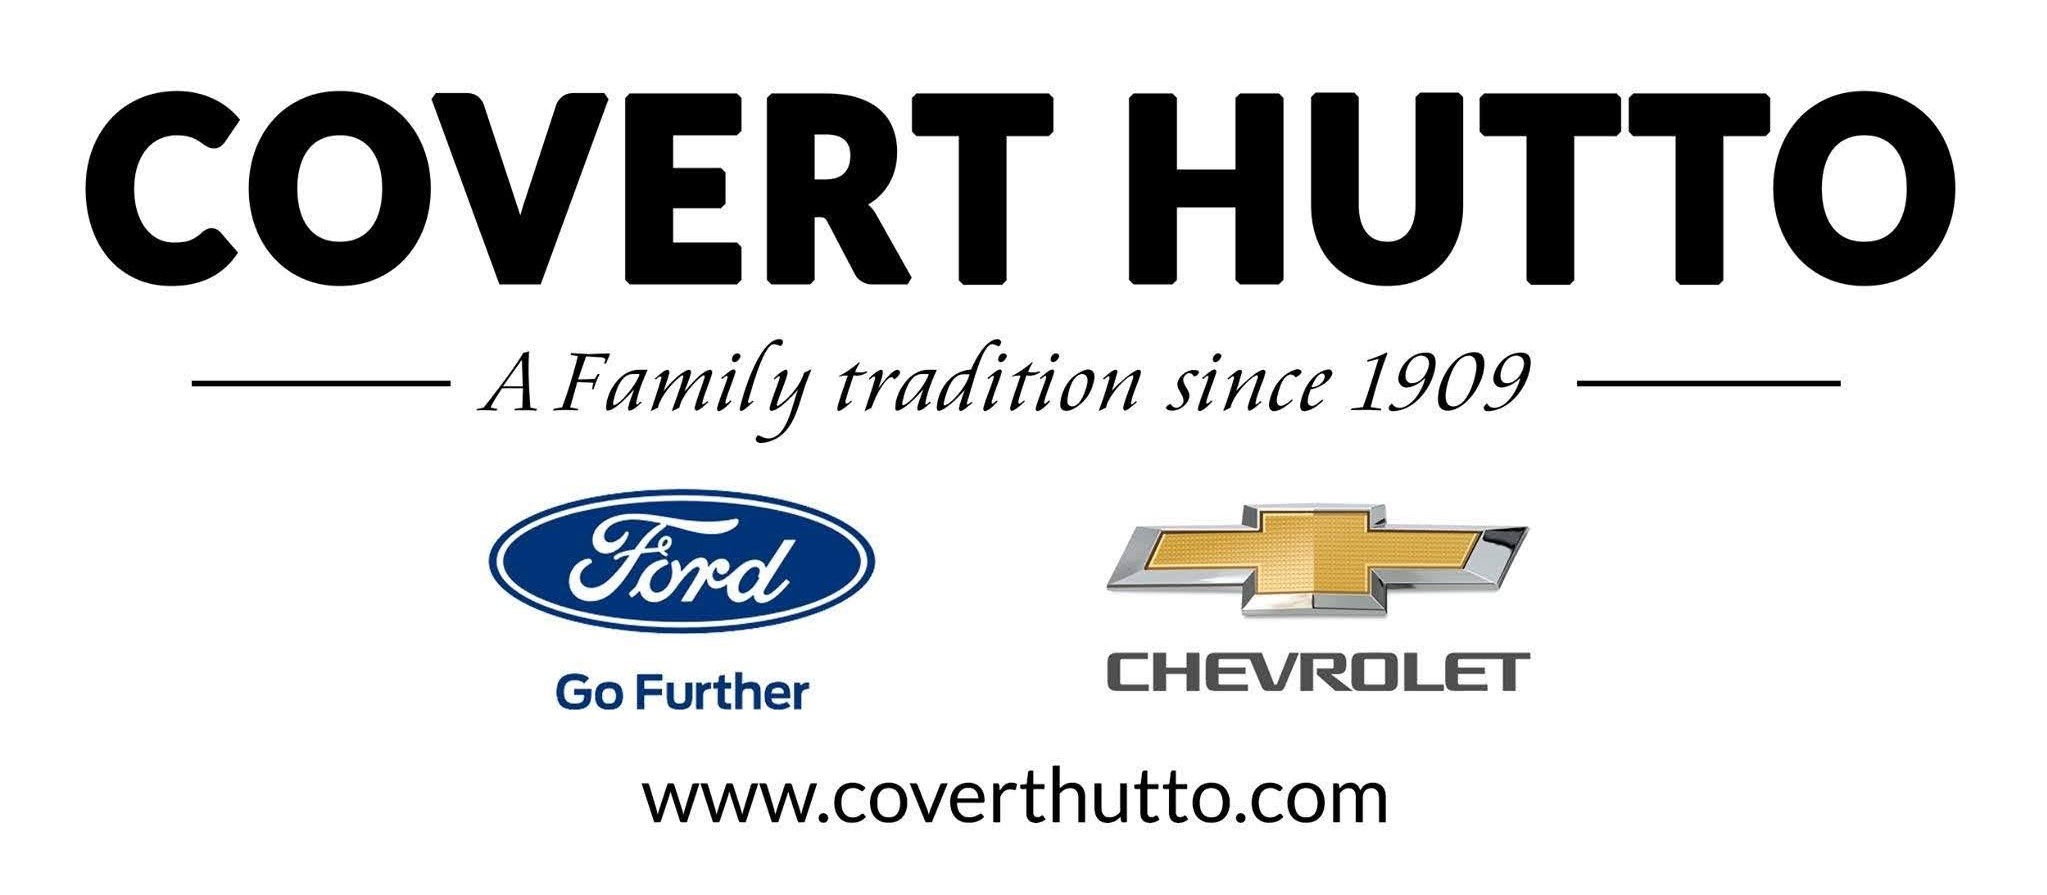 Covert Hutto Chevrolet & Ford 